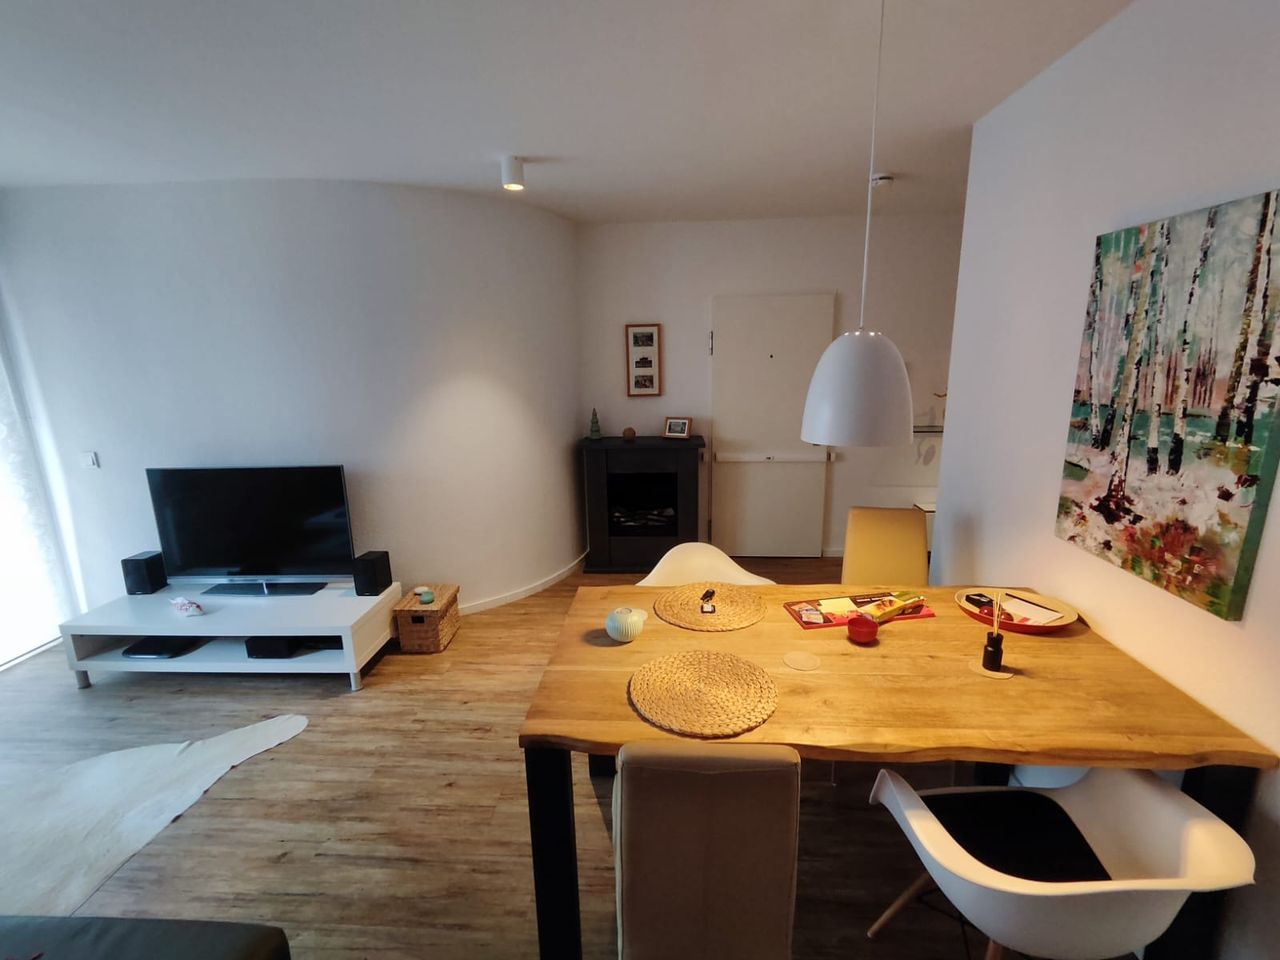 Charming, peaceful 3-room apartment located in Mitte between Mauerpark and Rosenthaler Platz.